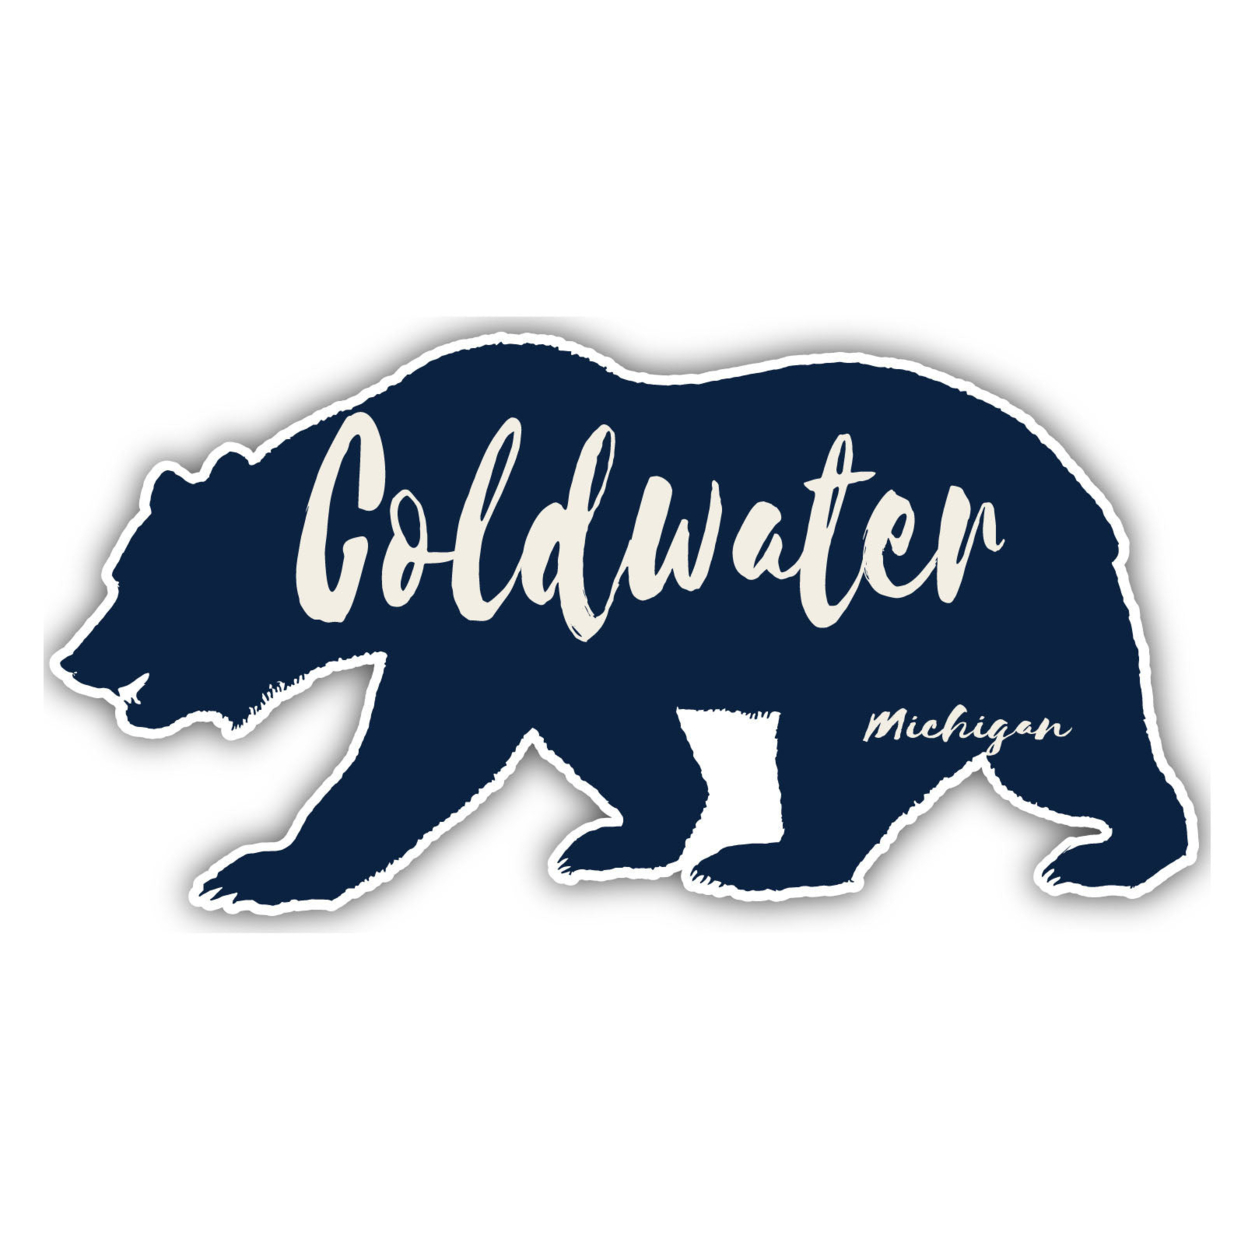 Coldwater Michigan Souvenir Decorative Stickers (Choose Theme And Size) - 4-Pack, 2-Inch, Bear